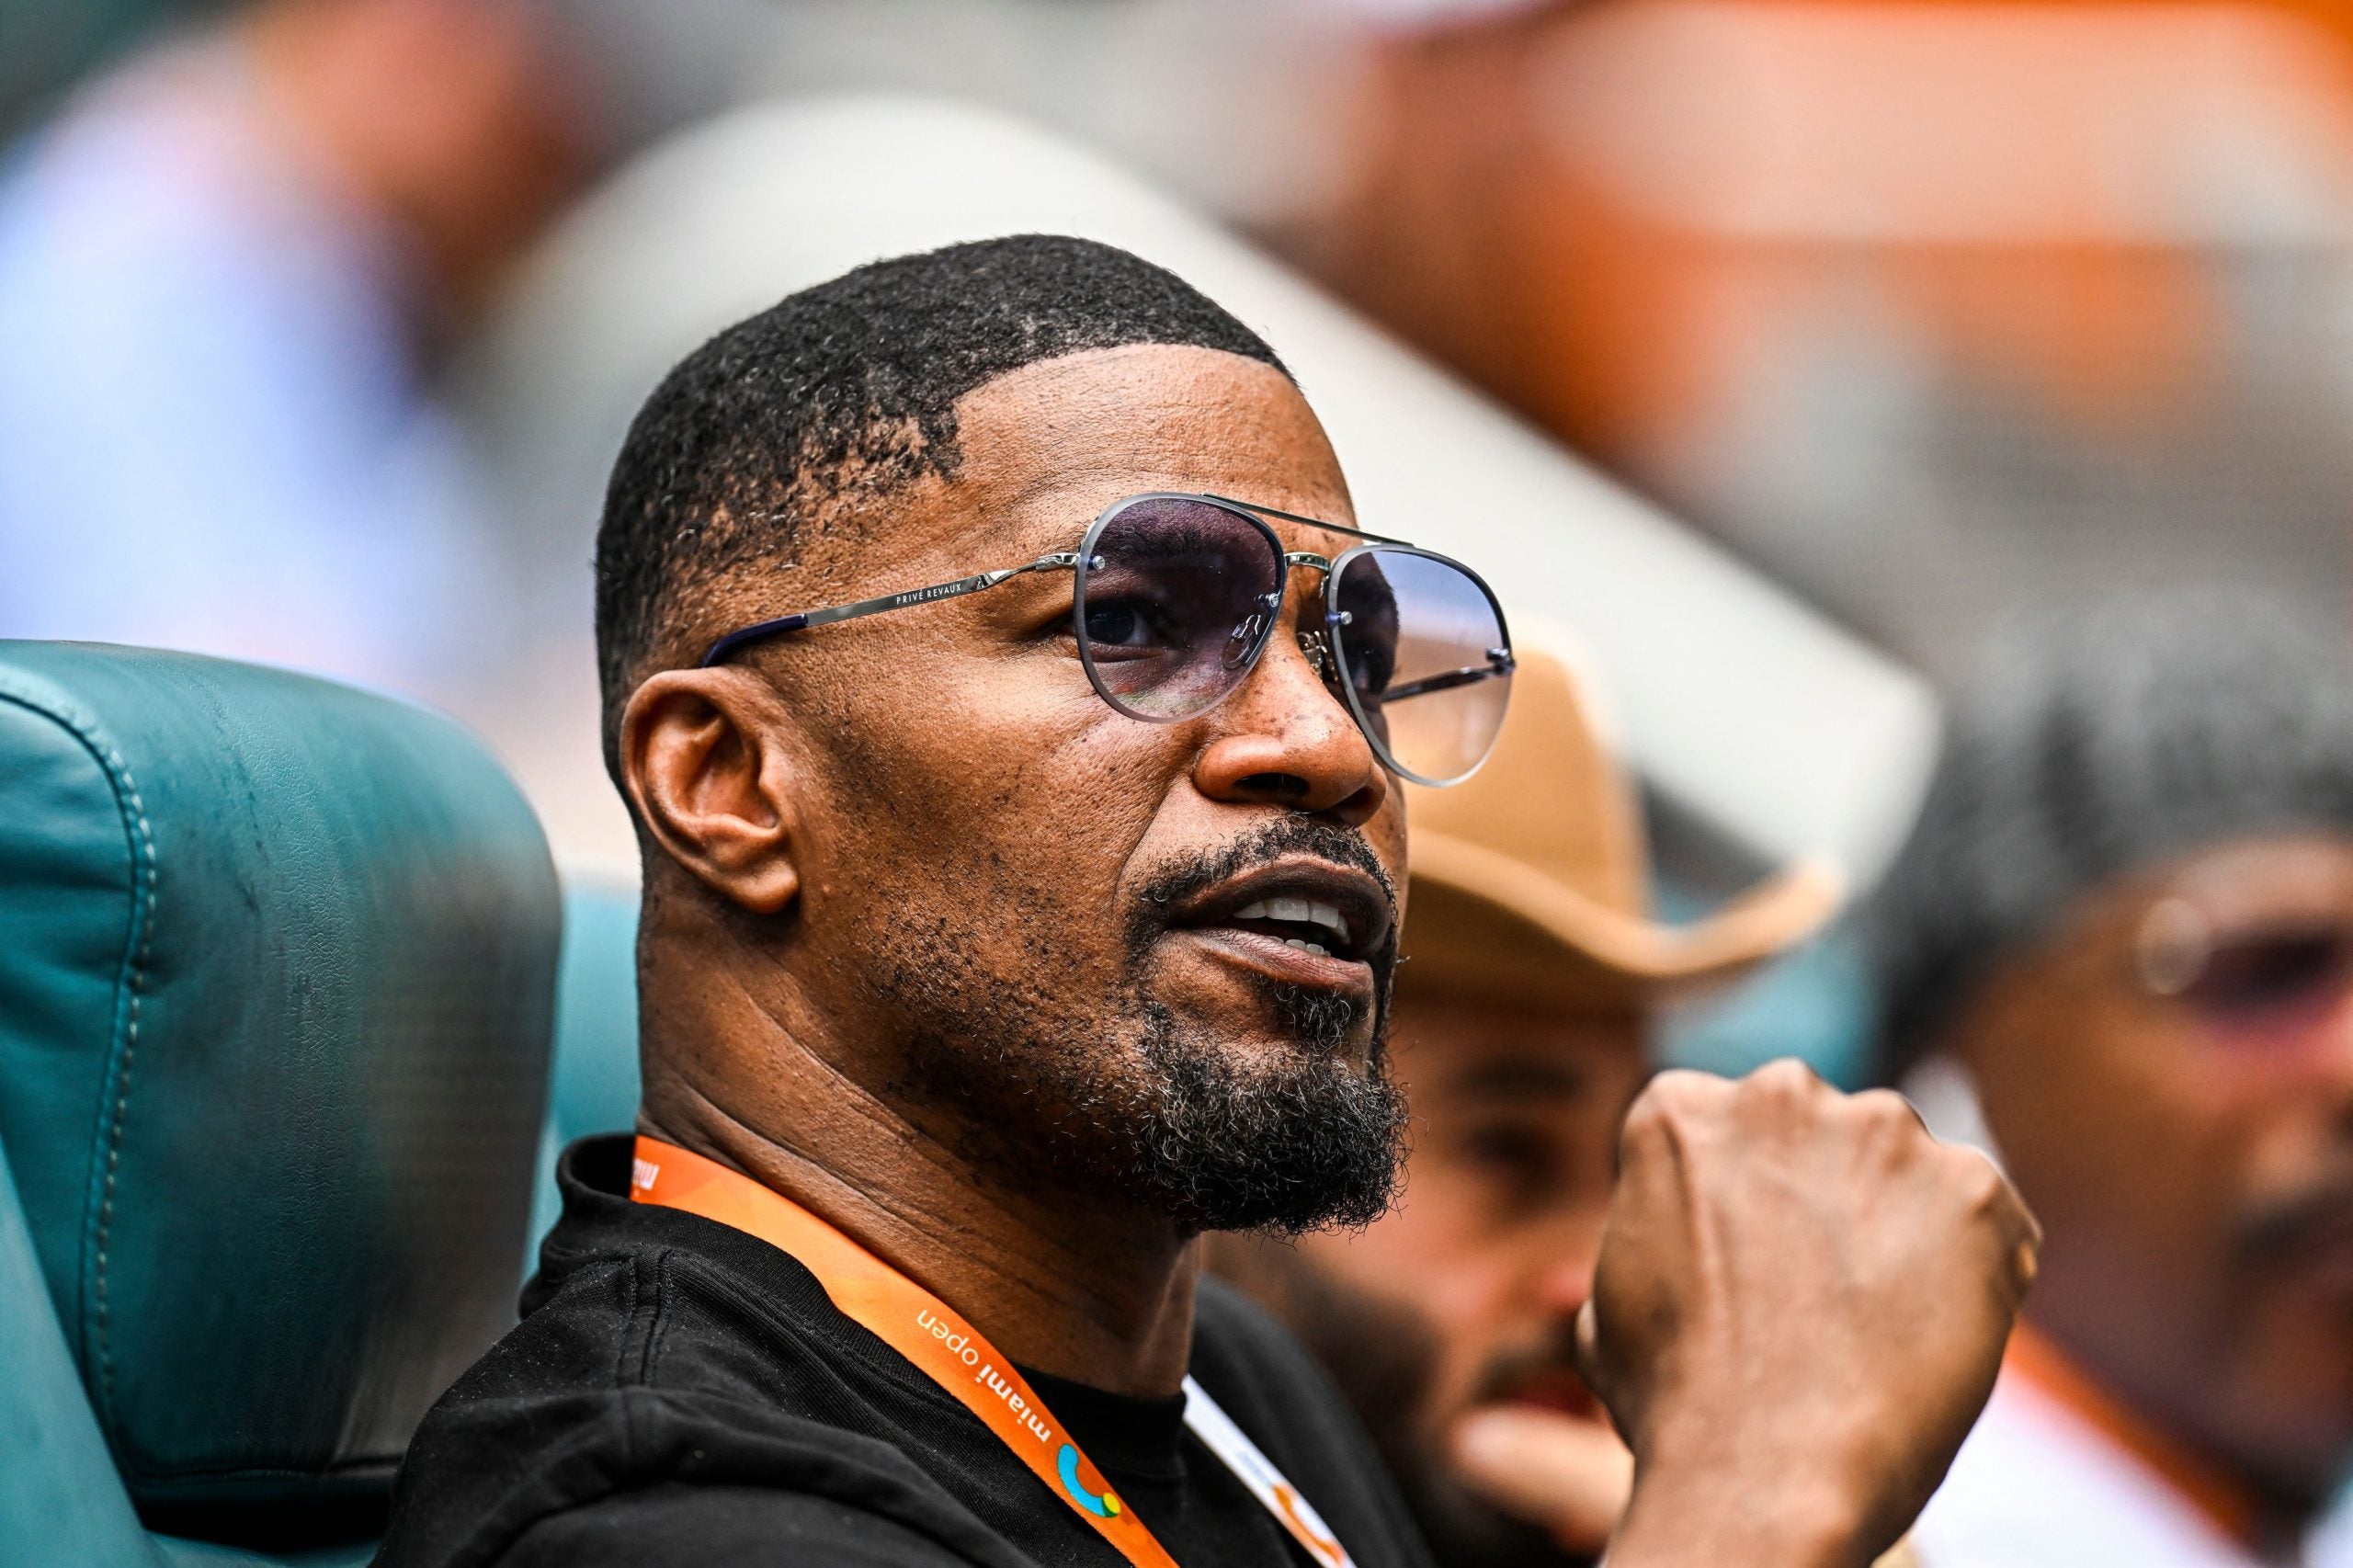 Jamie Foxx Waves To Fans In First Sighting Since “Medical Complication”